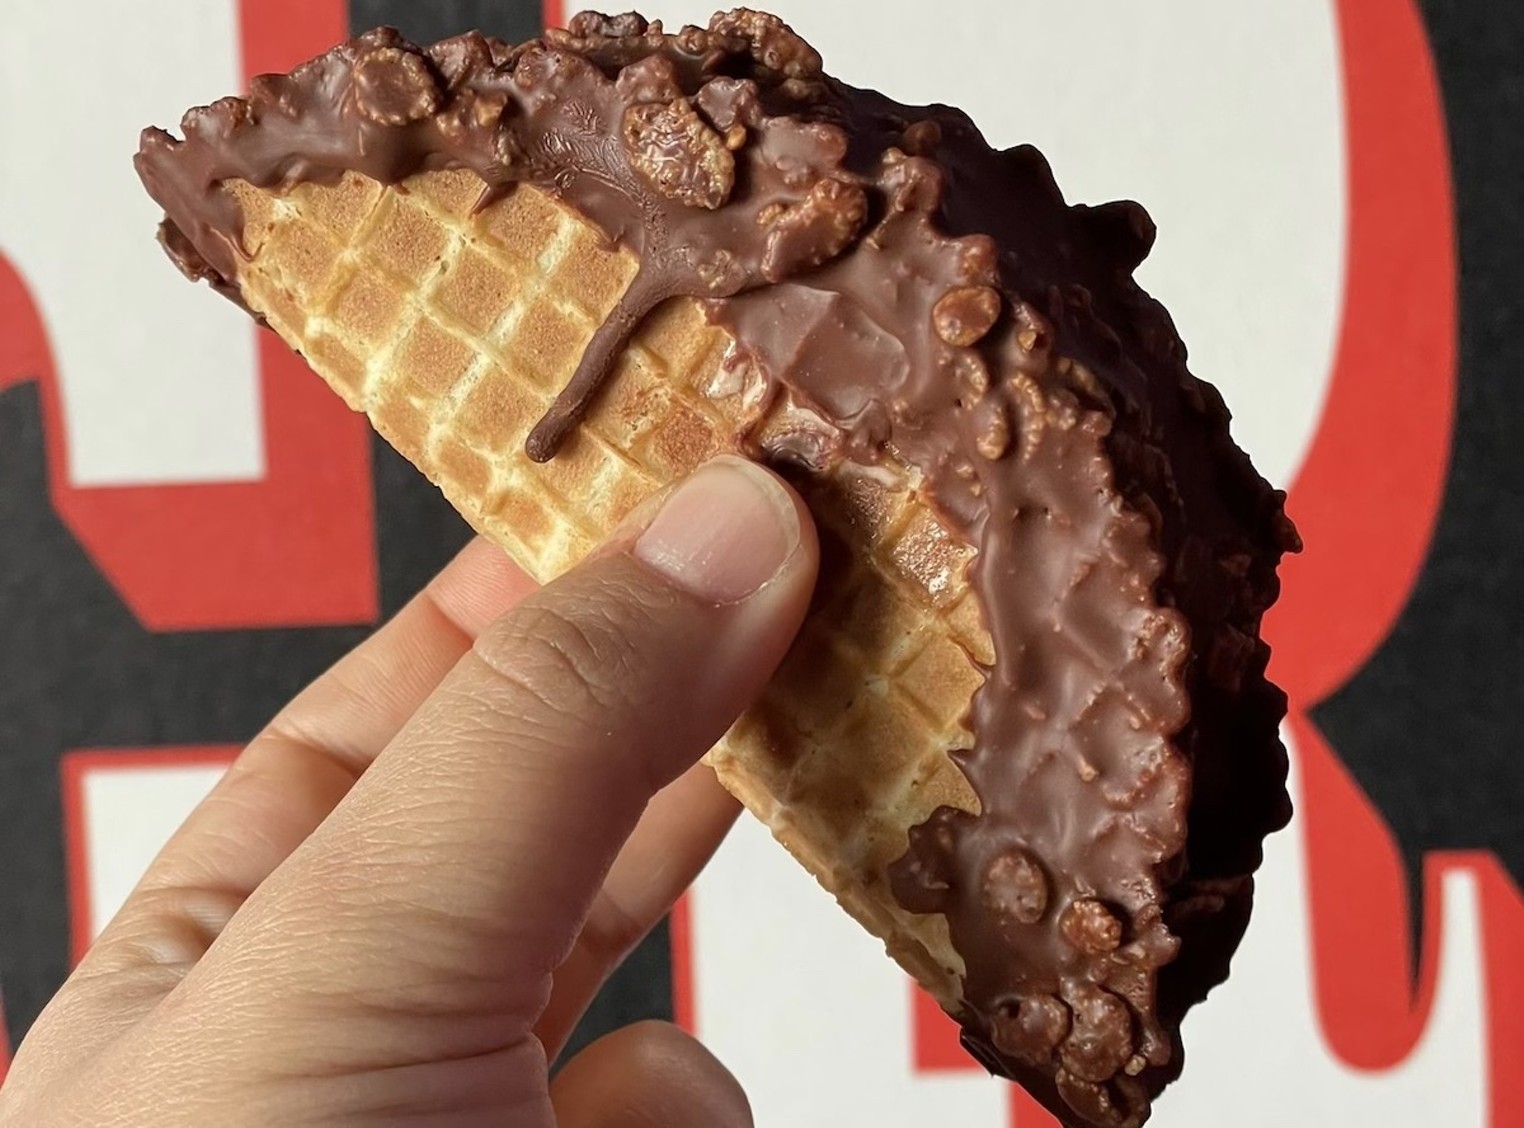 These Miami Chefs Are Making Their Own Version of Klondike's Choco Taco